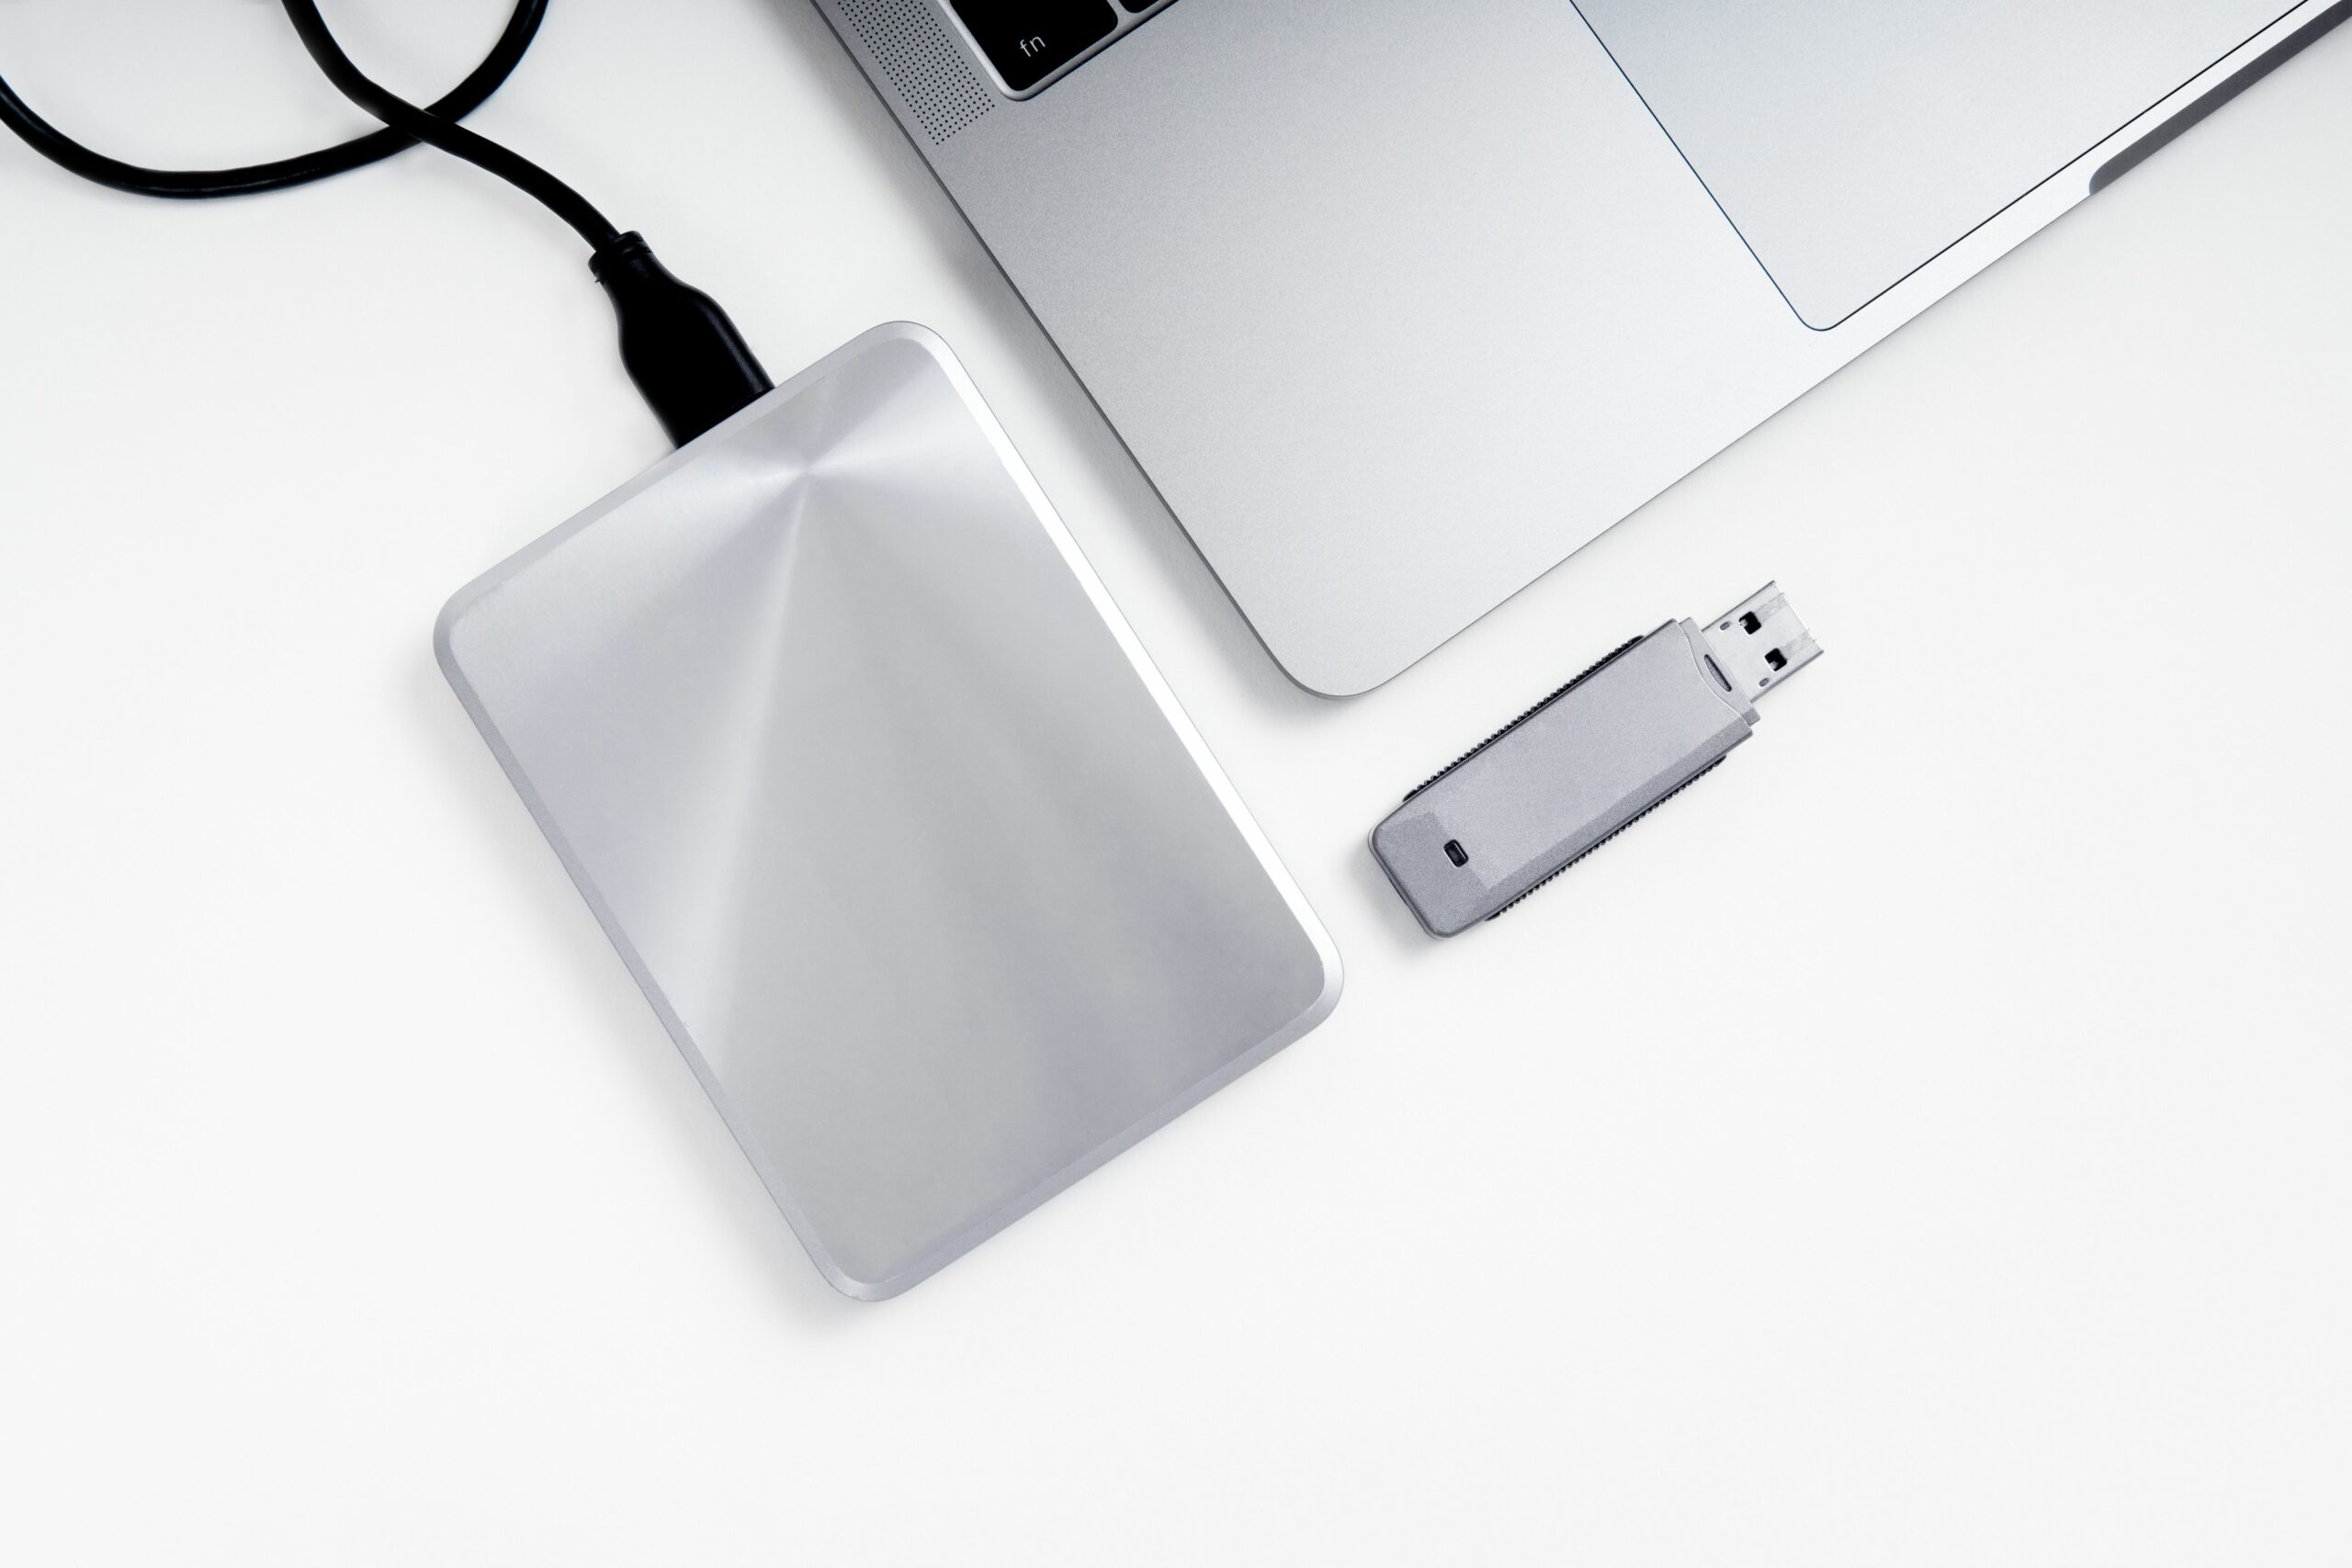 Portable,Hdd,Connected,To,A,Laptop,And,A,Usb,Flash